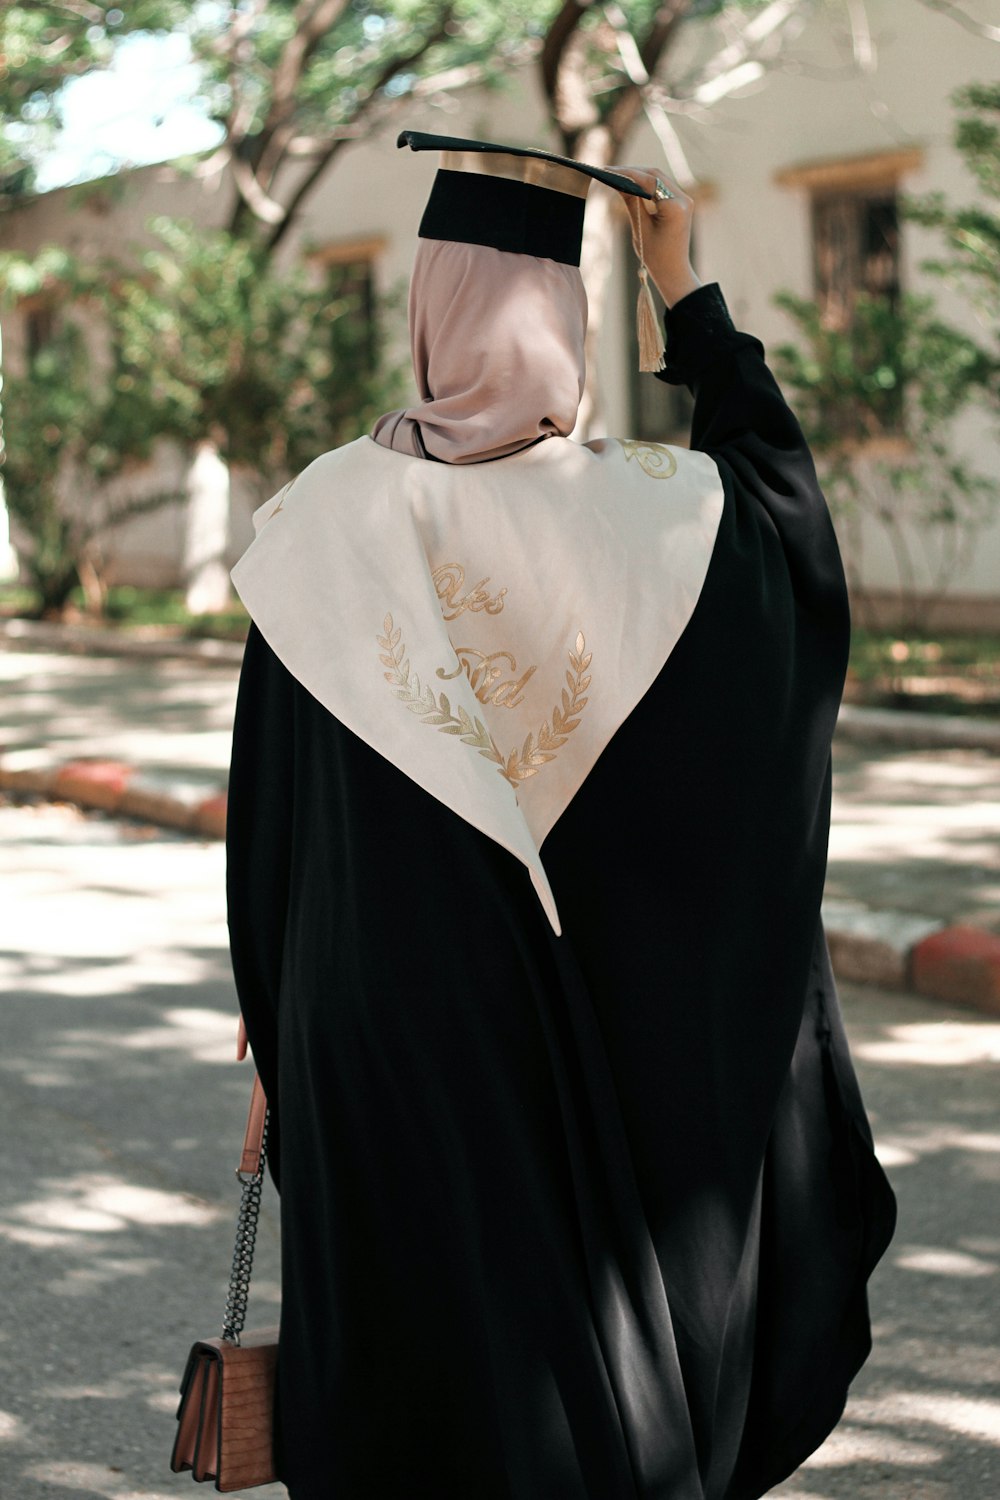 a woman in a graduation gown walking down the street